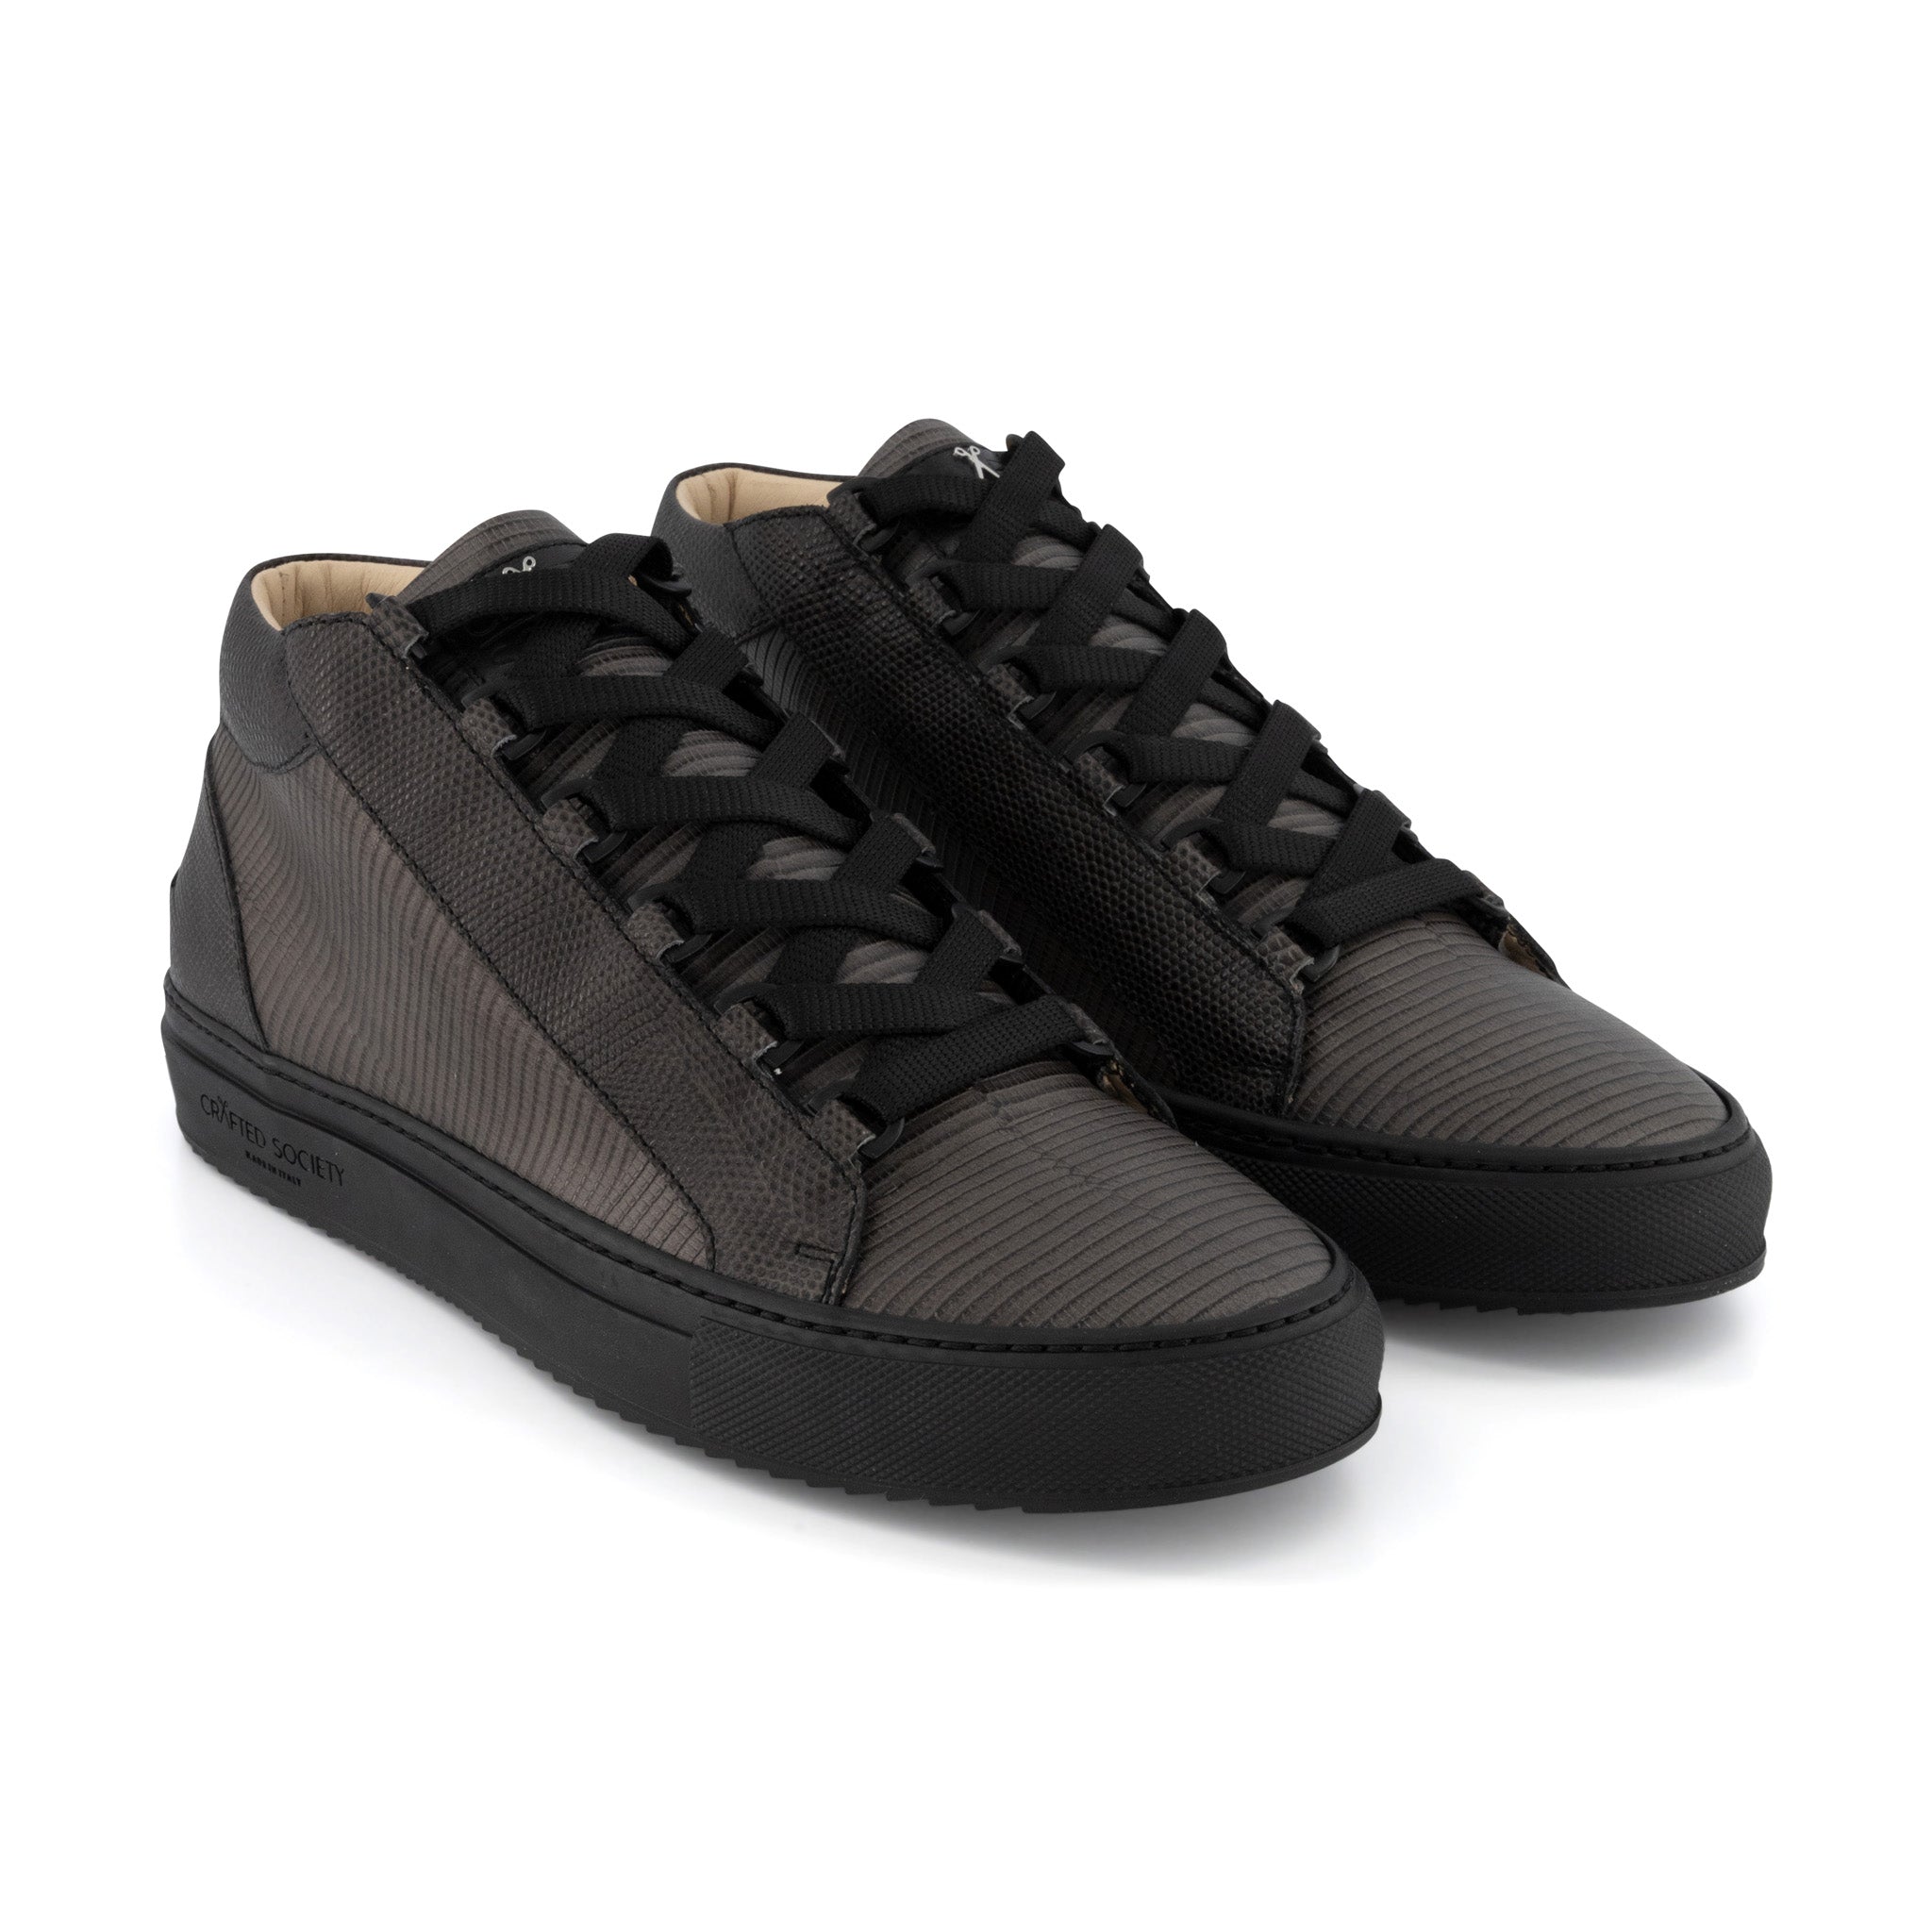 Rico Mid LTD EDN | Grey & Black full grain leather | Black Outsole | Made in Italy